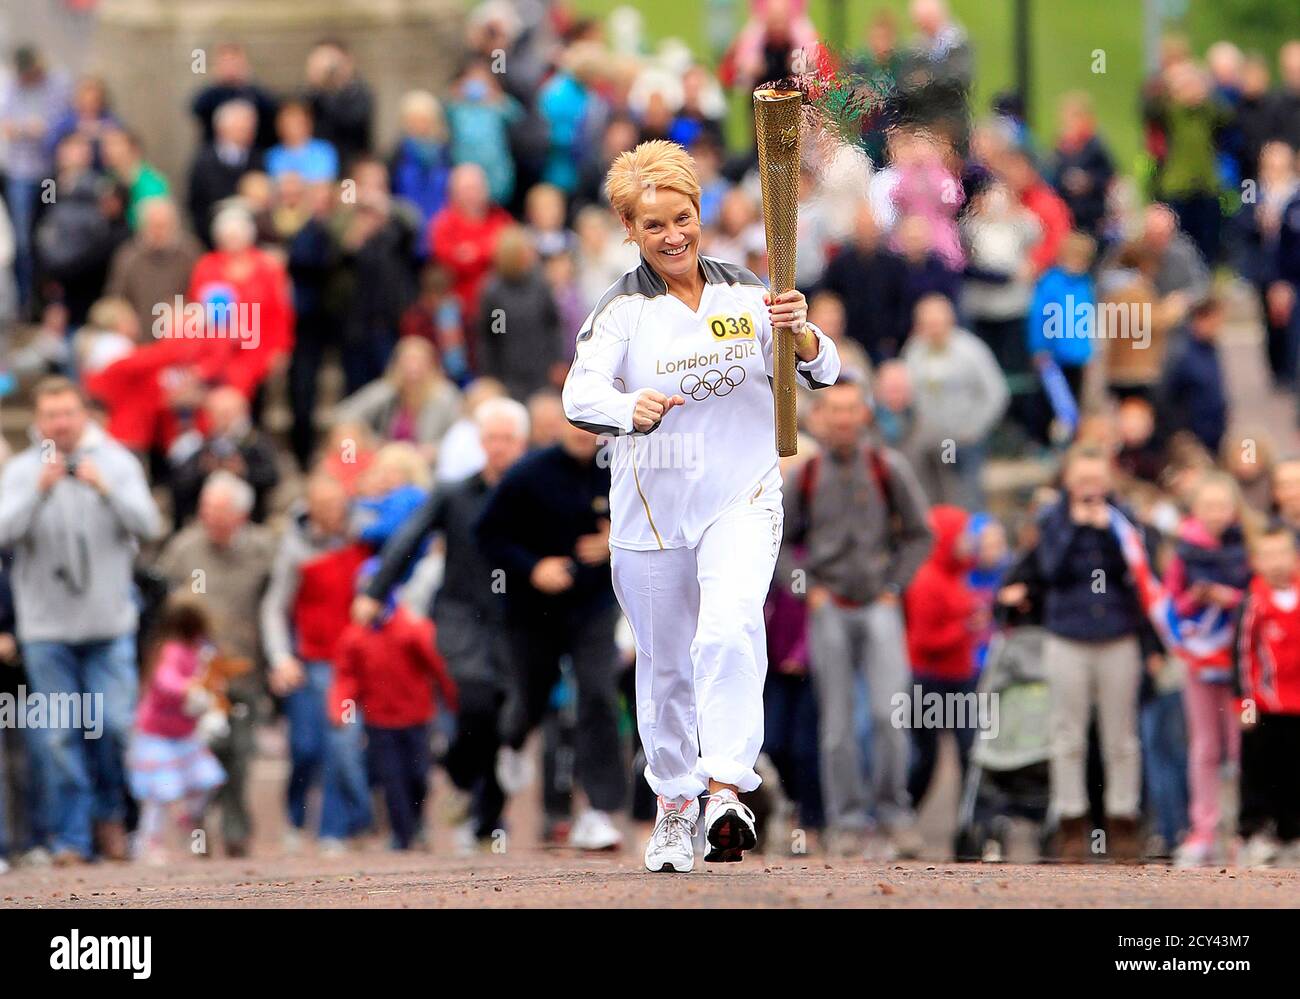 Geraldine McCann carries the Olympic torch towards Parliament Buildings in Belfast June 3, 2012. On Sunday the Olympic flame - on a five-day visit to Northern Ireland - will be carried to the Titanic Building, recently opened in Belfast's docklands to commemorate the famous liner which was built in the city and sank 100 years ago. It will then make its way through more than 60 towns and villages across Northern Ireland, carried by about 600 local people aged between 12 to 93.   REUTERS/Cathal McNaughton (NORTHERN IRELAND - Tags: SPORT OLYMPICS SOCIETY) Stock Photo